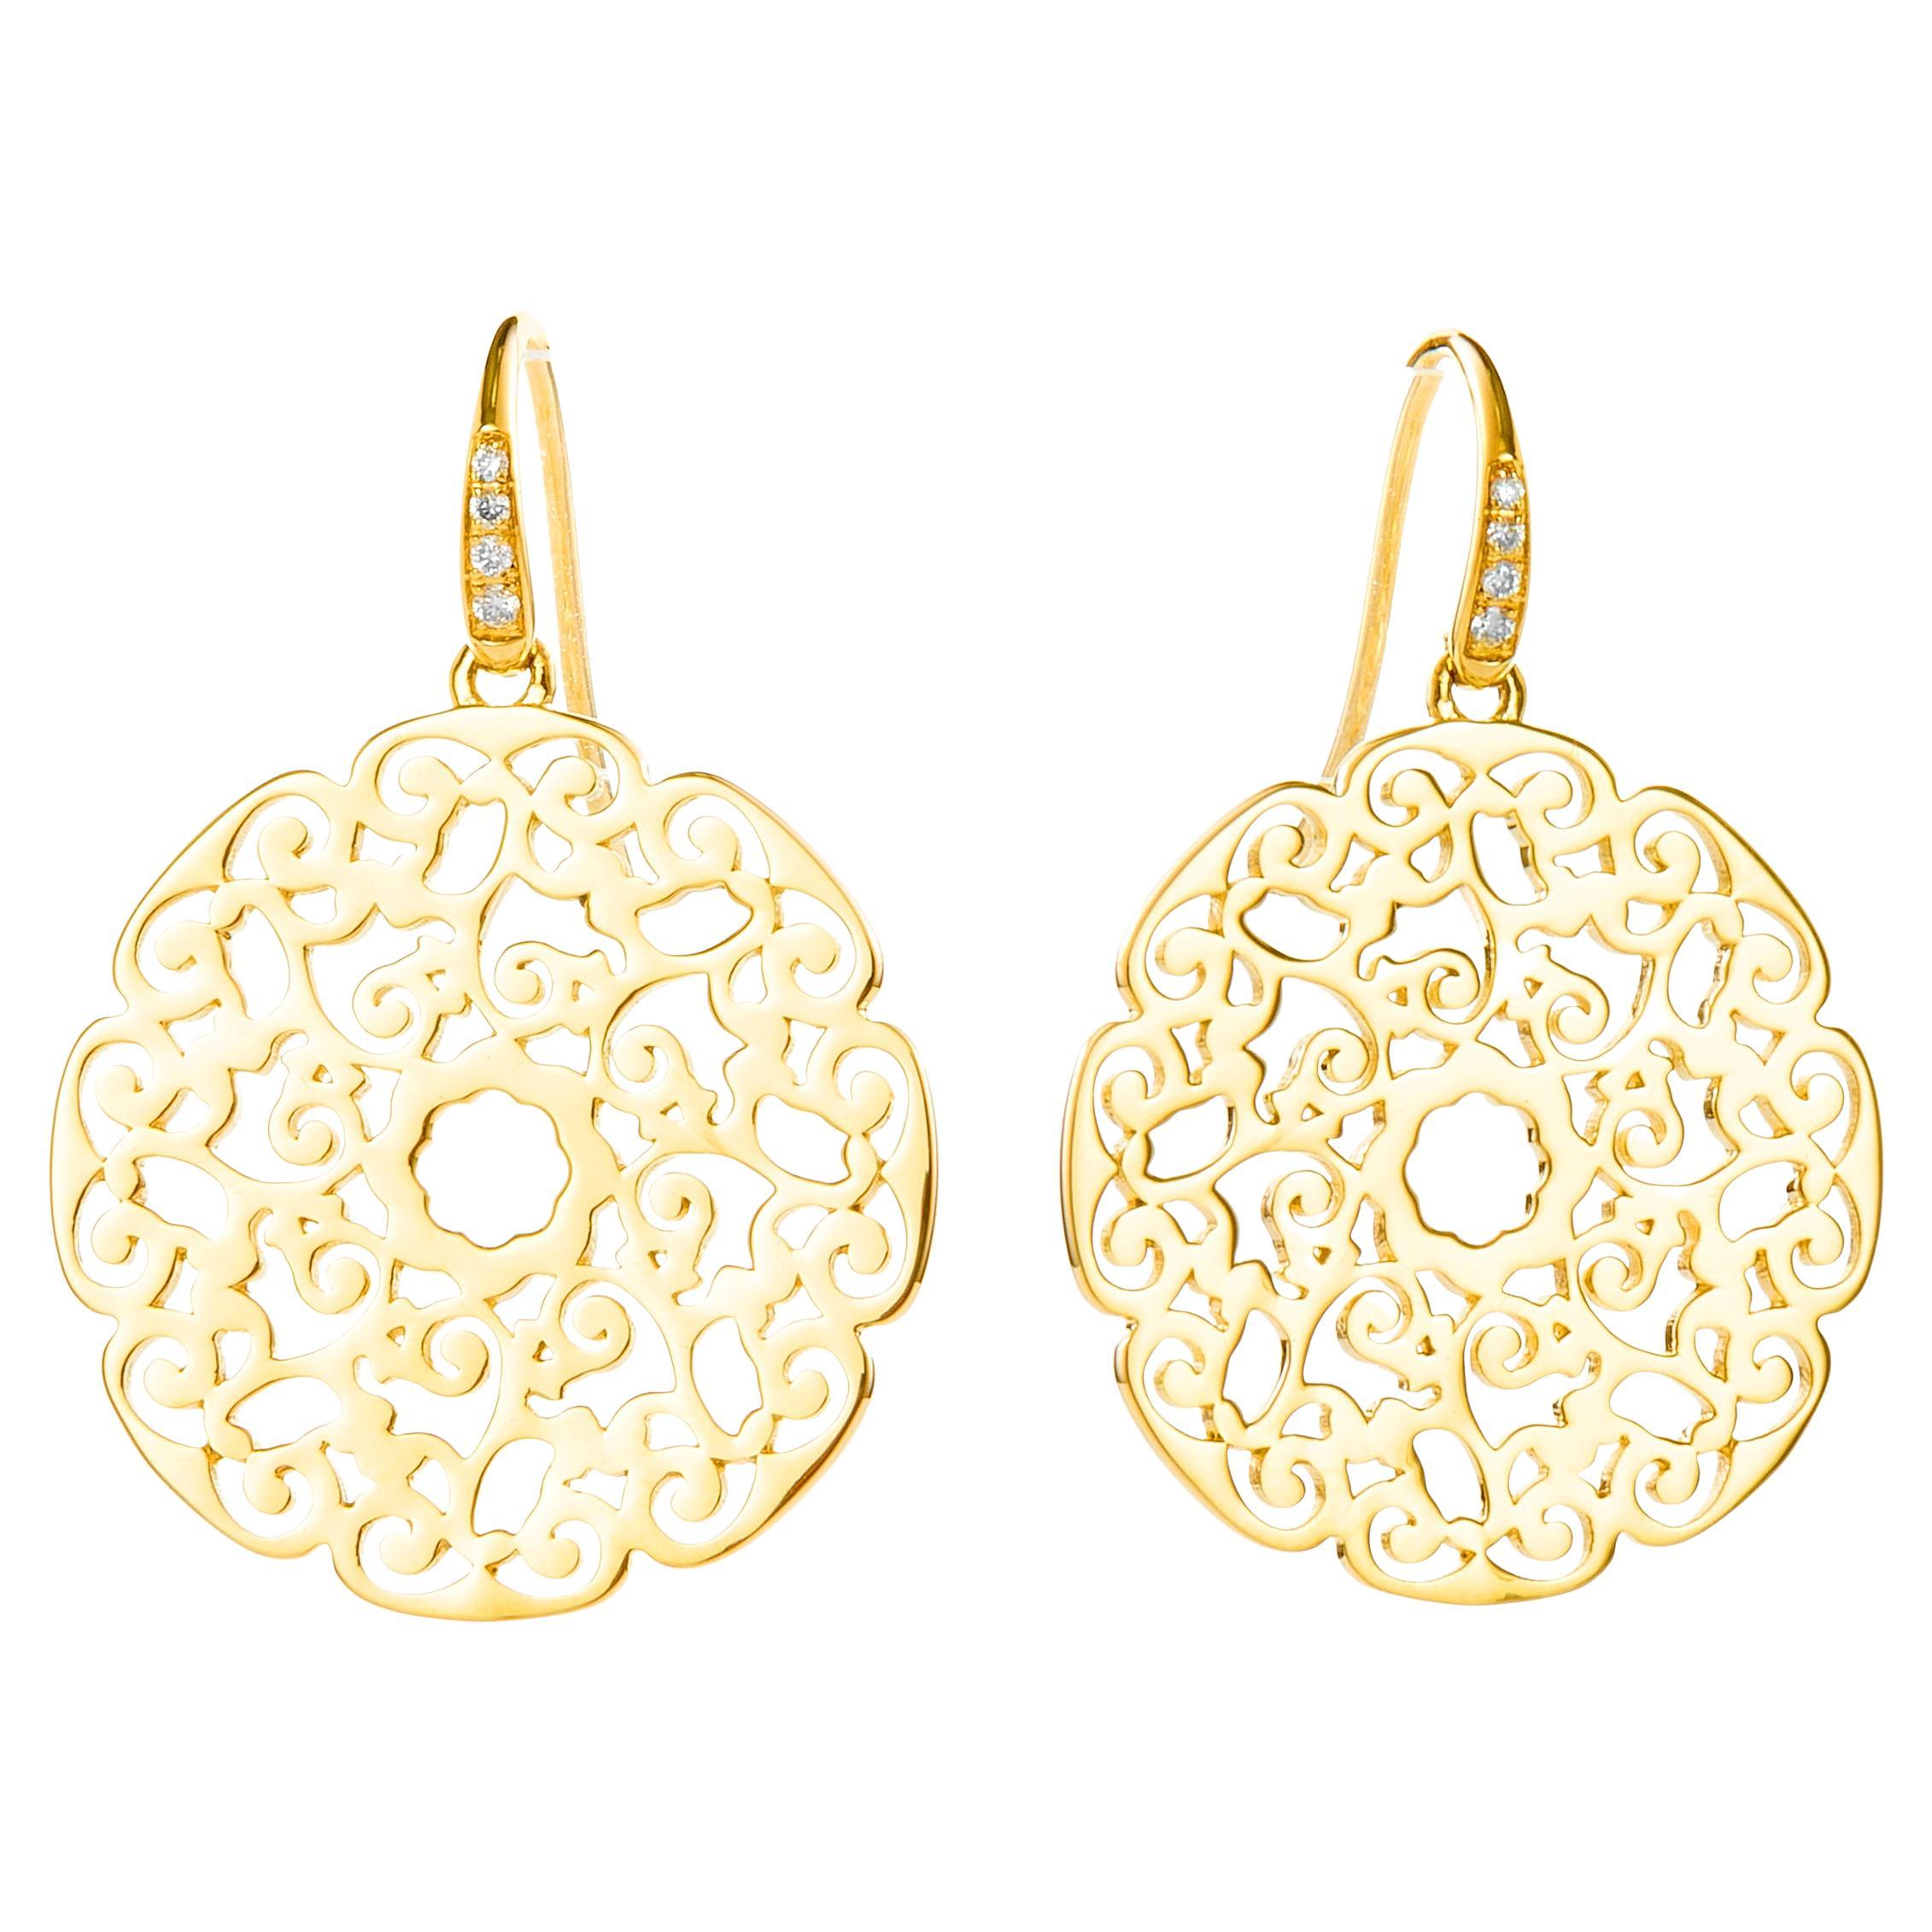 Syna Yellow Gold Mogul Earrings with Champagne Diamonds